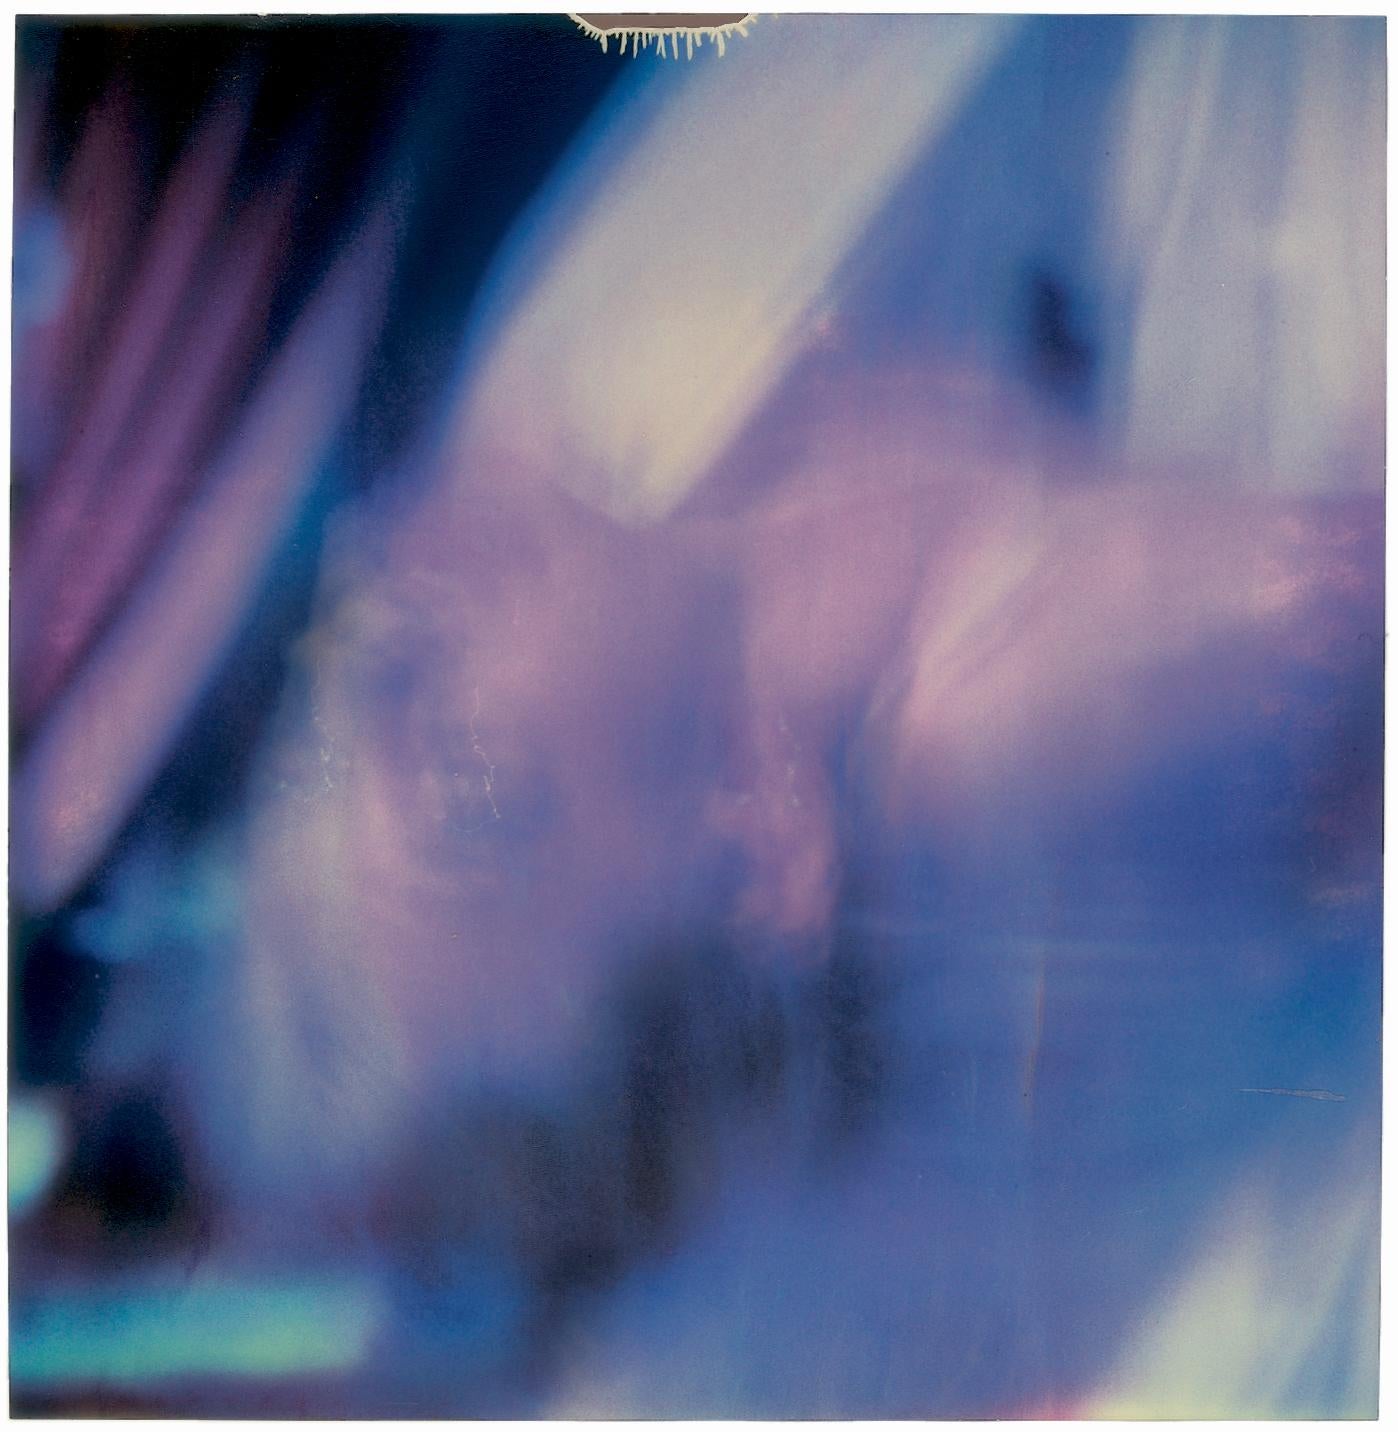 Dancer (Stay) - 8 pieces, analog, Polaroid, Contemporary, 21st Century, Color For Sale 5